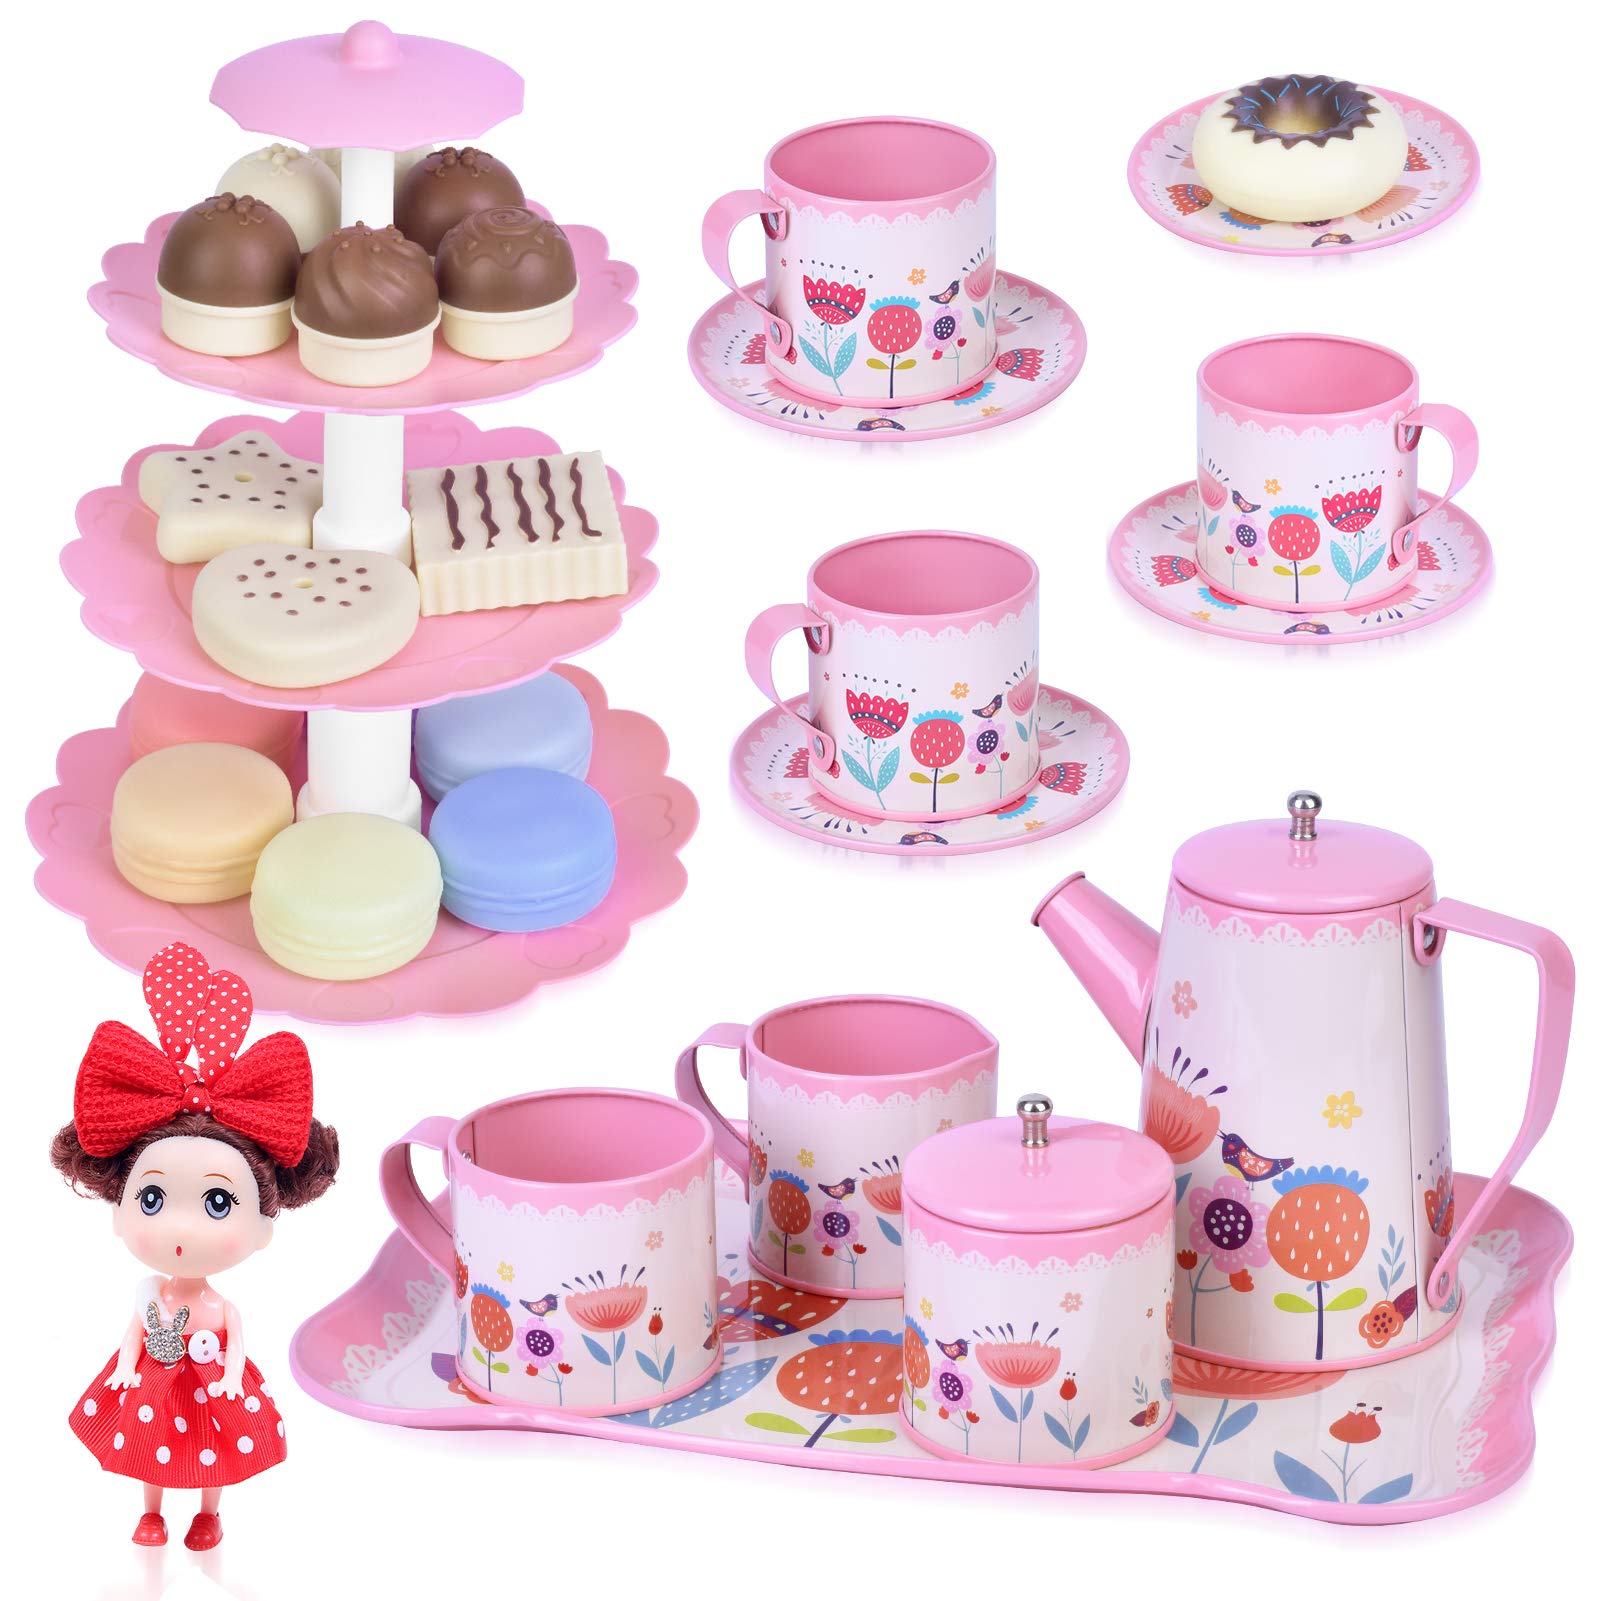 Tea Party Set for Little Girls - Tea Set Kids 38 Pcs Princess Tea Toy Set Including Teapot Tray Dessert Tower Cookie Cake Cute Dolls Kitchen Pretend Play Toy Gifts for Girls Age 3 4 5 6 7 8